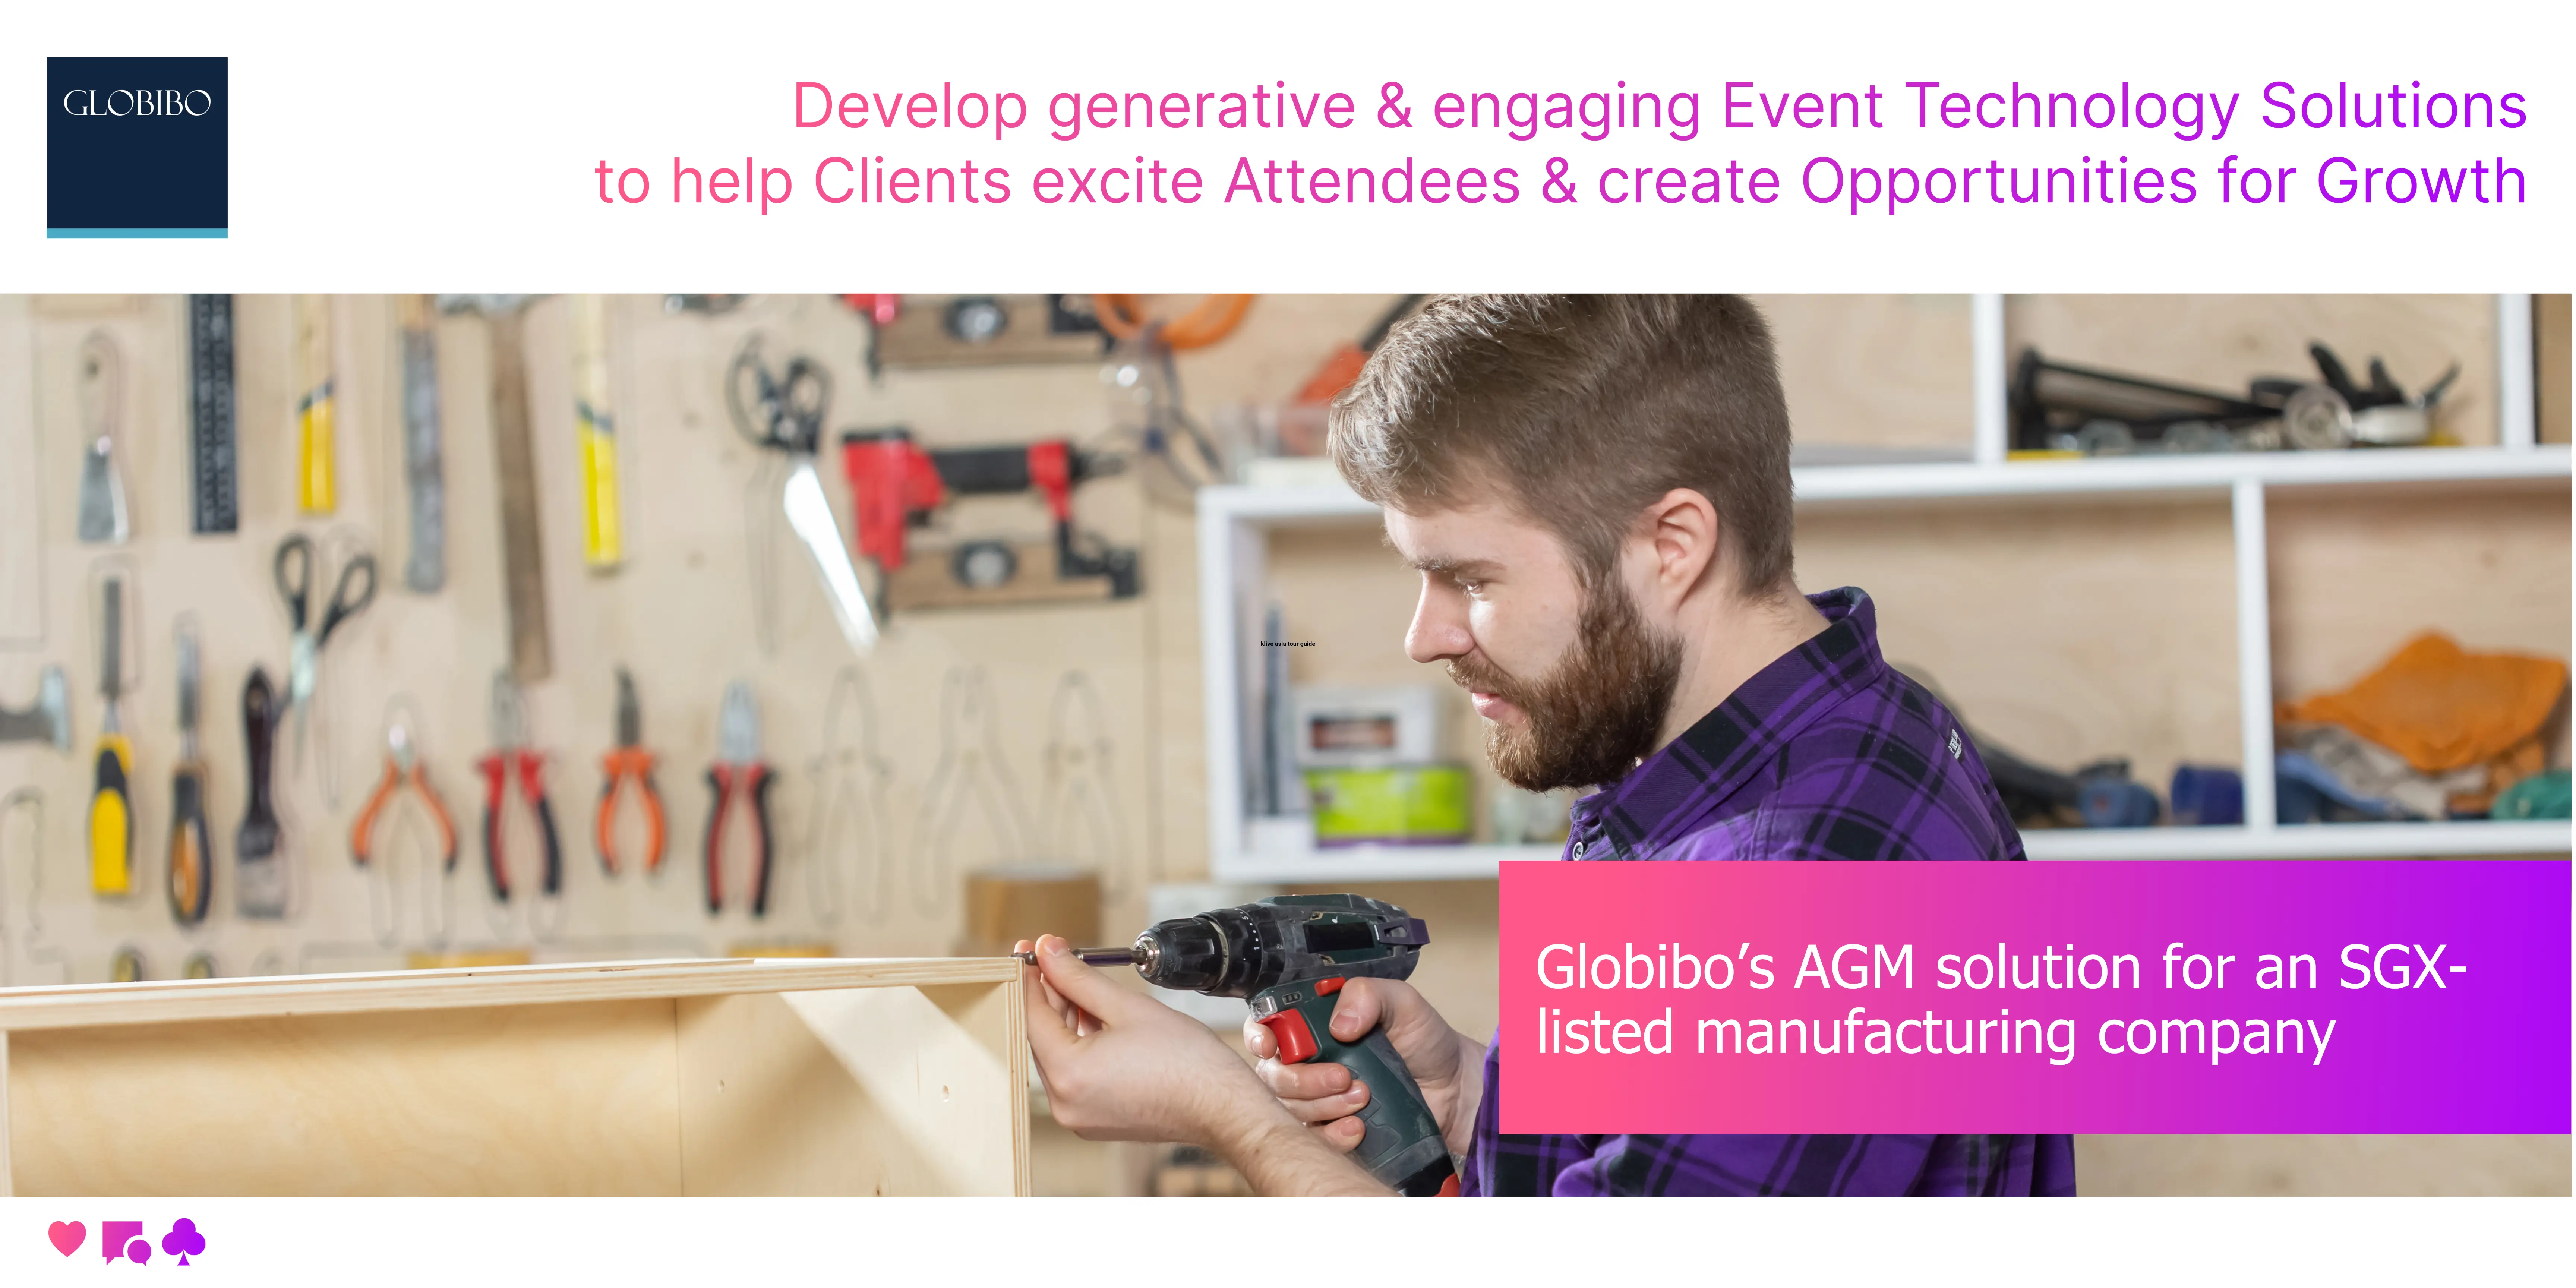 Globibo’s AGM solution for an SGX-listed manufacturing company